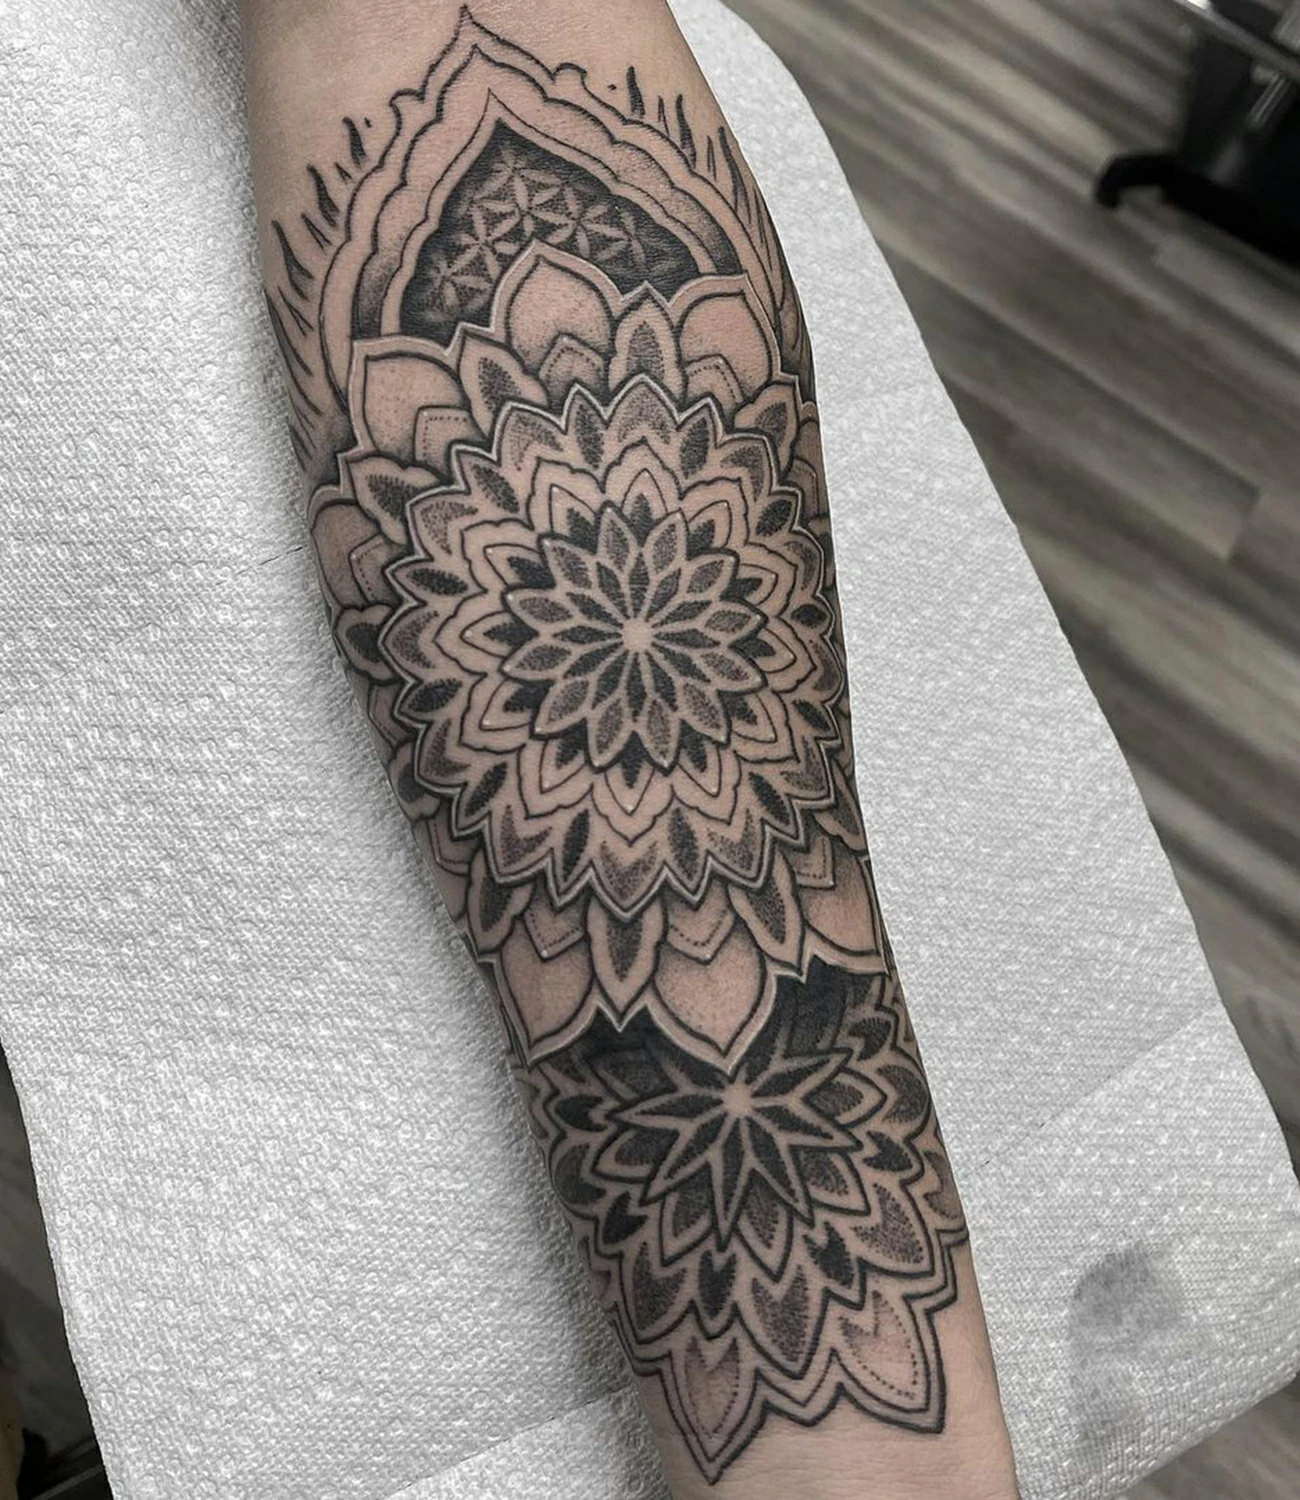 Geometric Forearm Tattoo: Geometric forearm tattoos offer a versatile canvas for intricate and meaningful designs that can be easily shown or concealed.